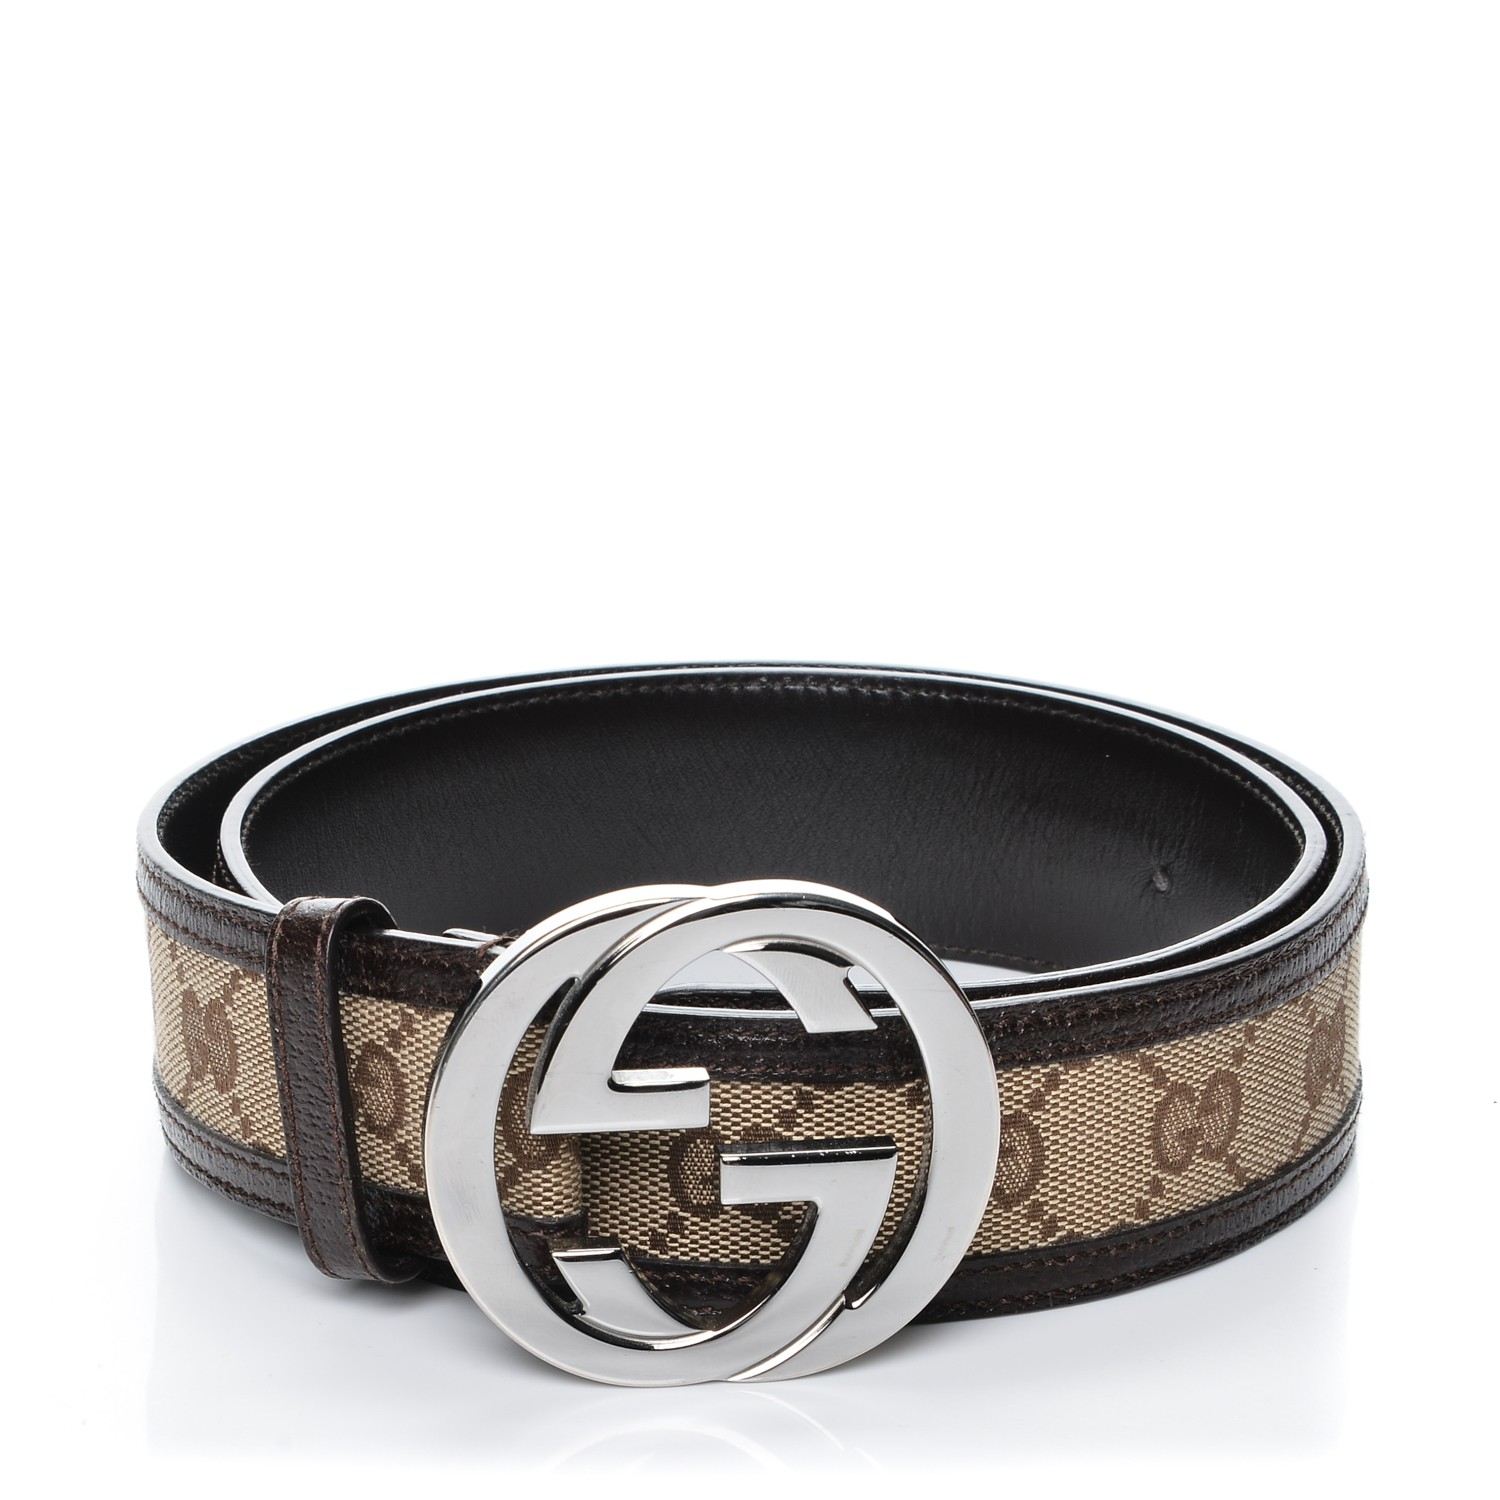 480199 gucci,Save up to 19%,www.ilcascinone.com